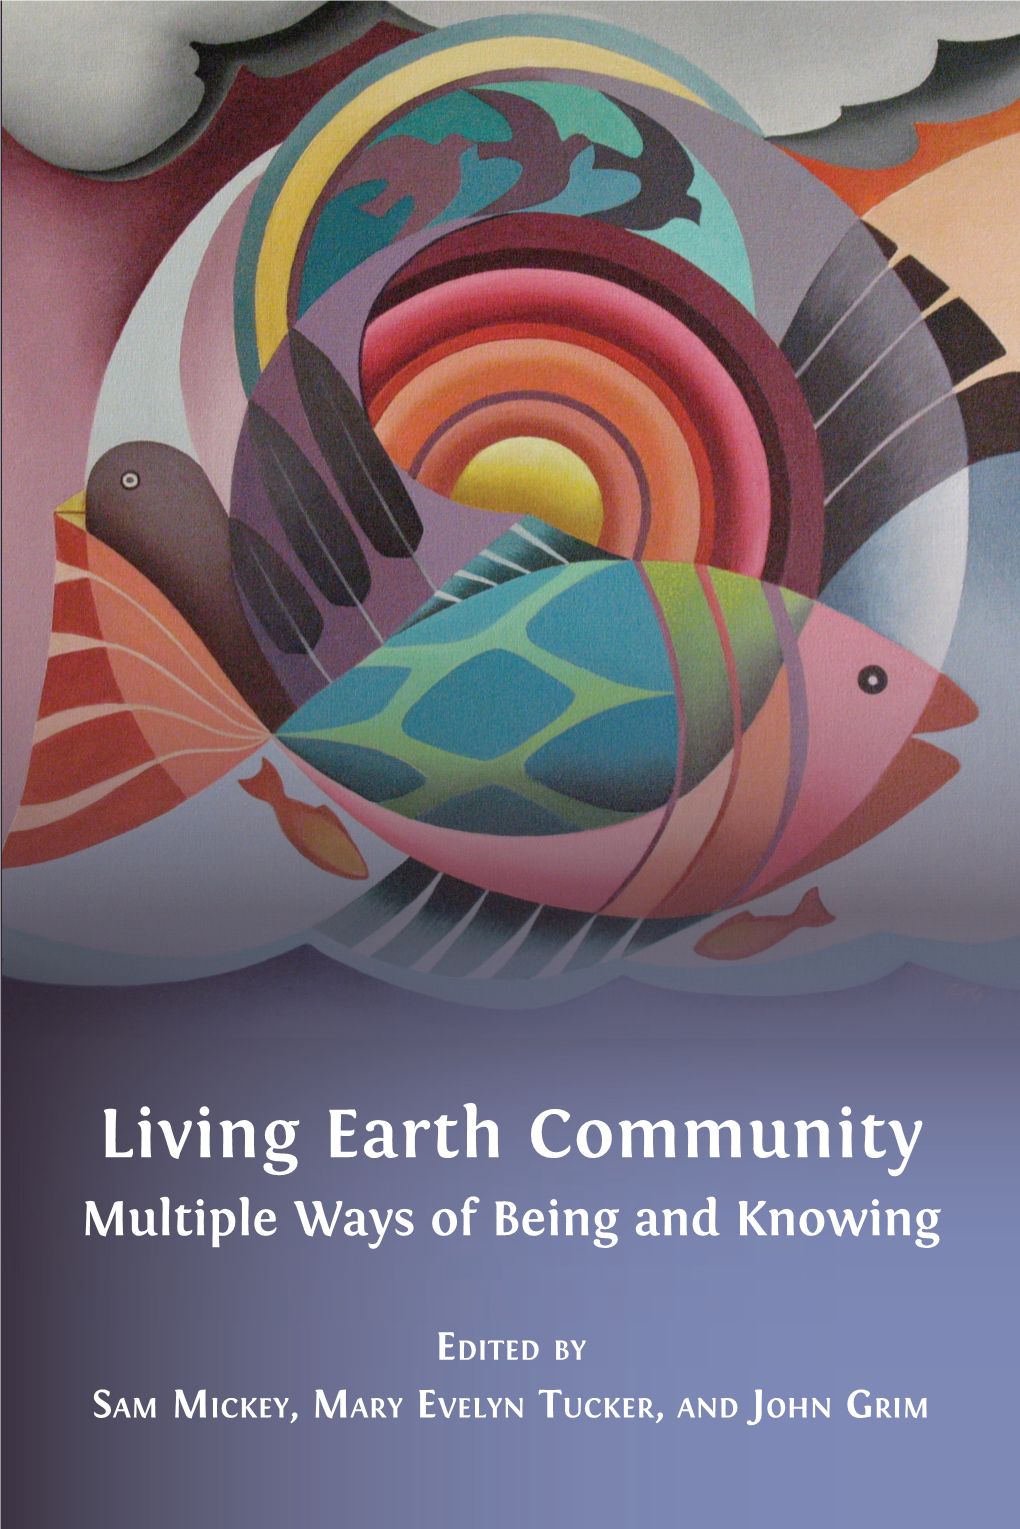 Living Earth Community: Multiple Ways of Being and Knowing (Cambridge, UK: Open Book Publishers, 2020)